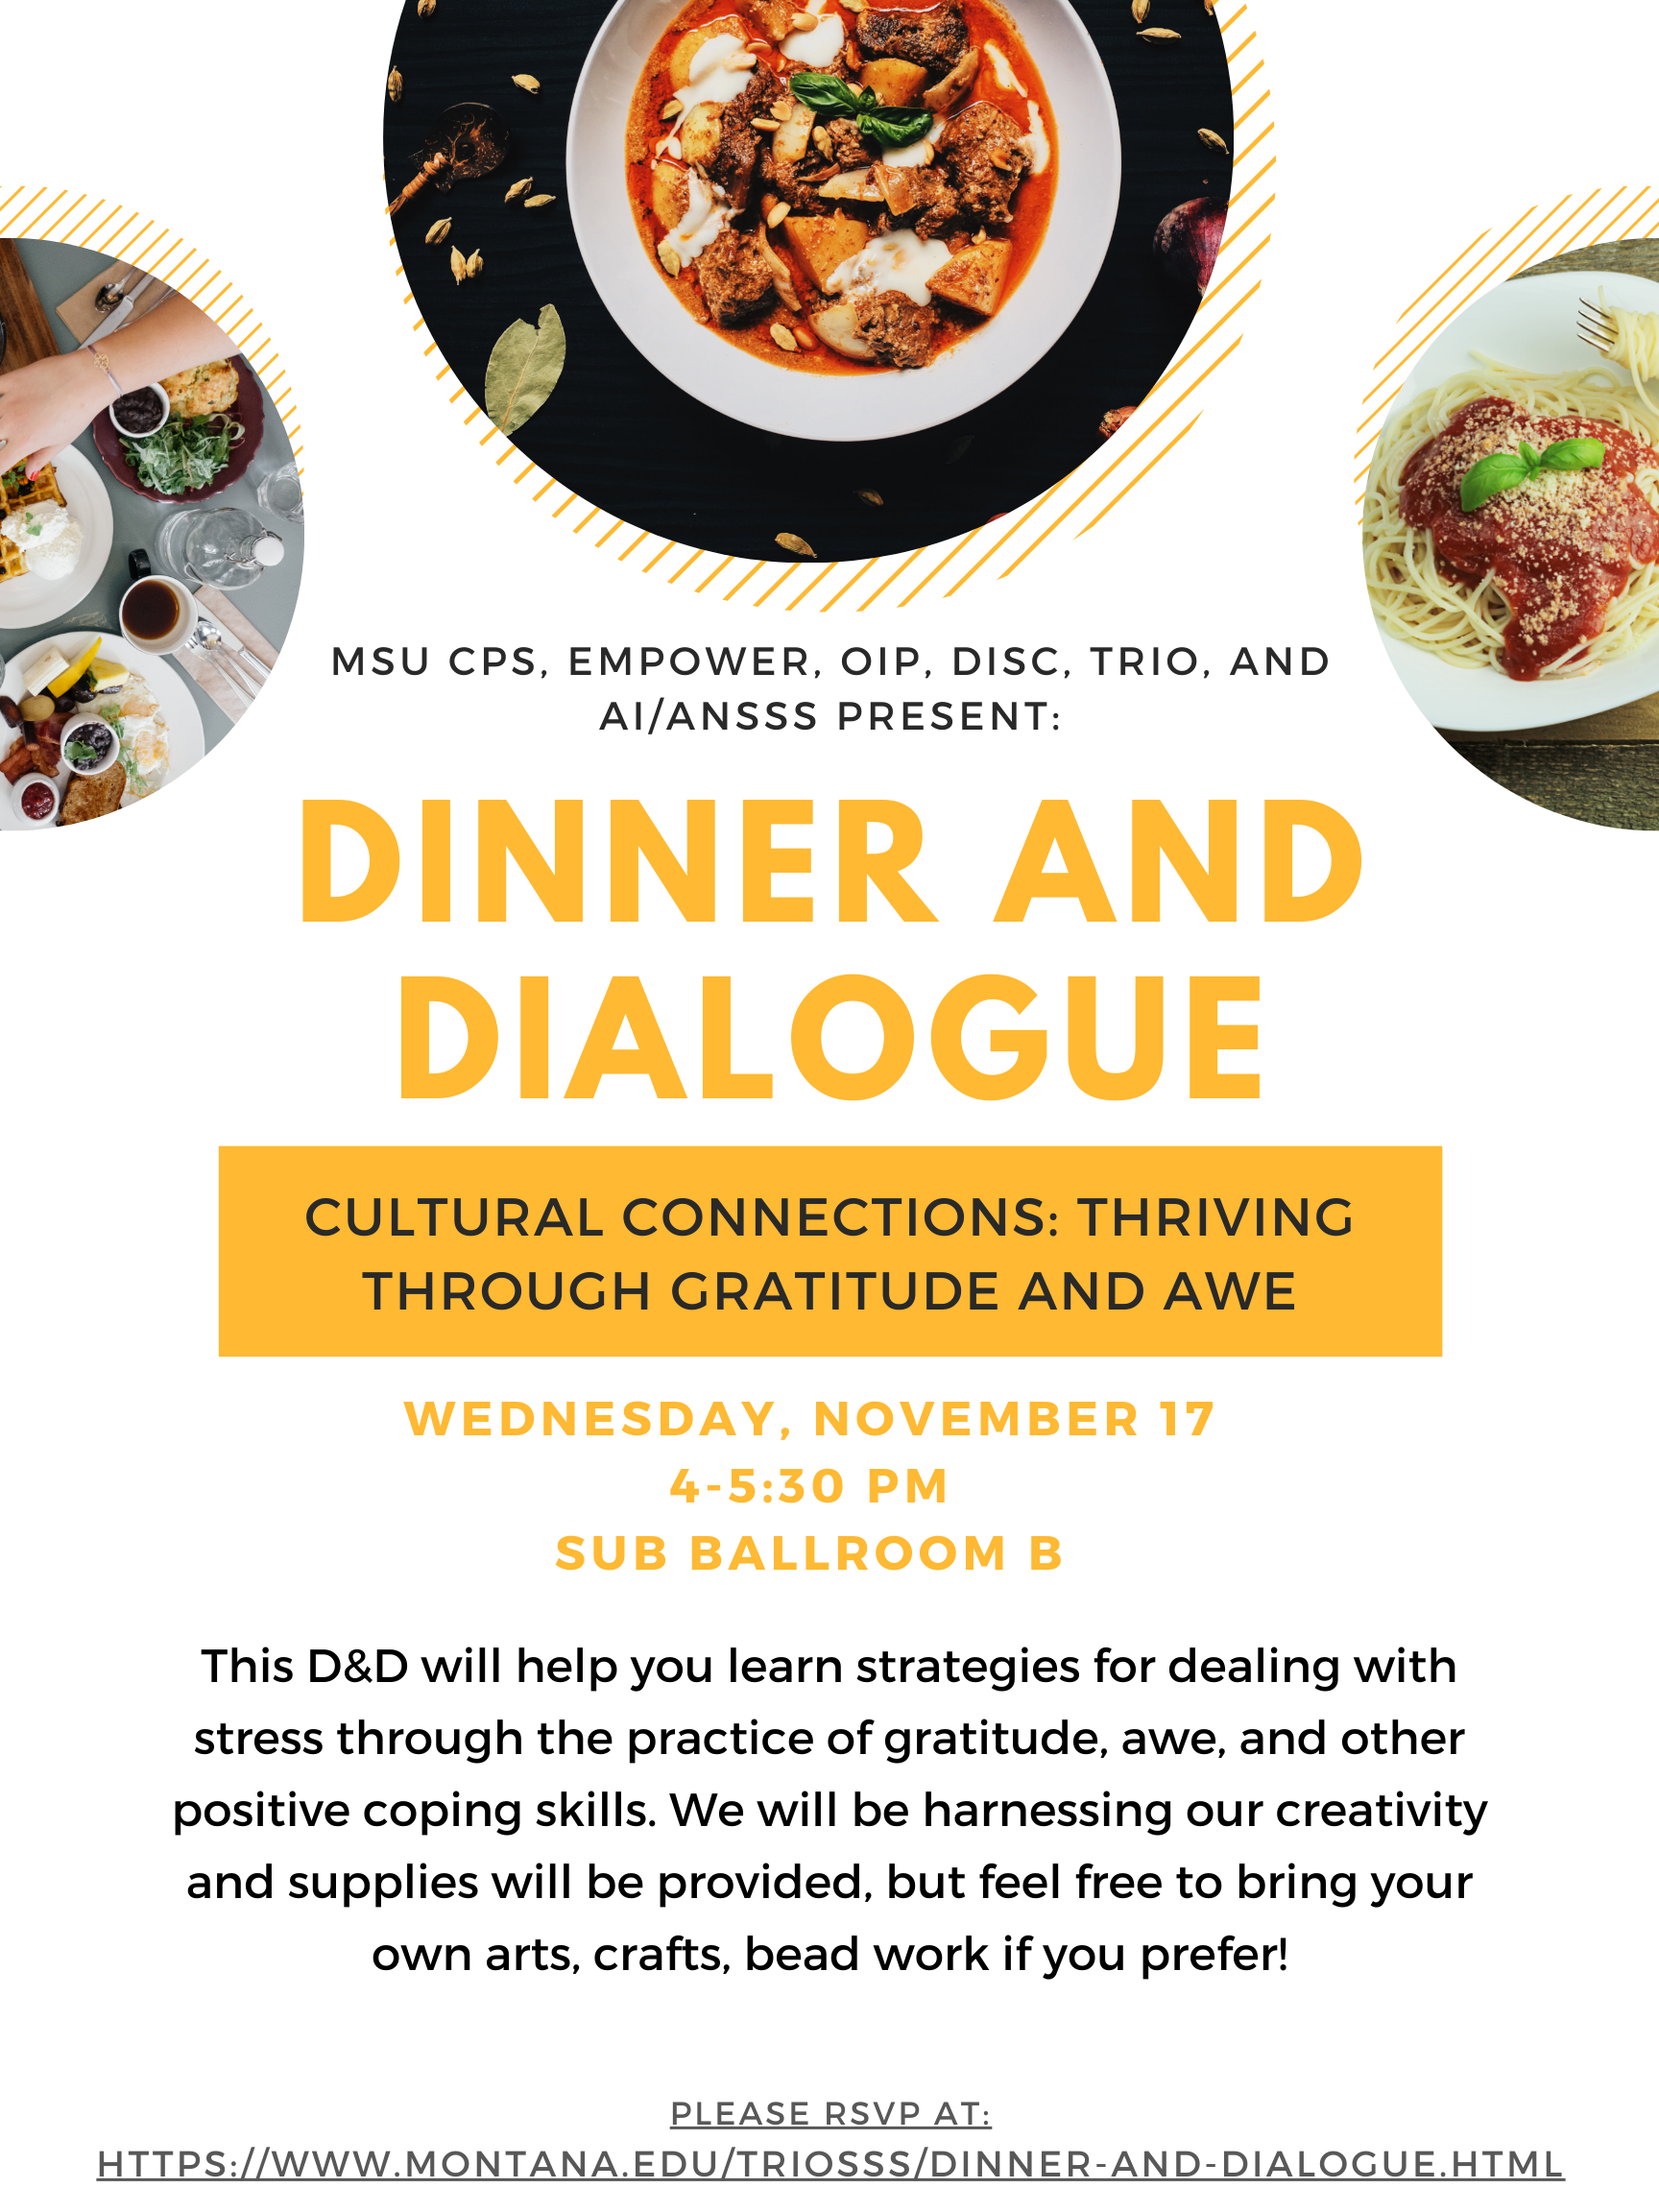 Flyer with wih 3 plates of food and Dinner and Dialogue information